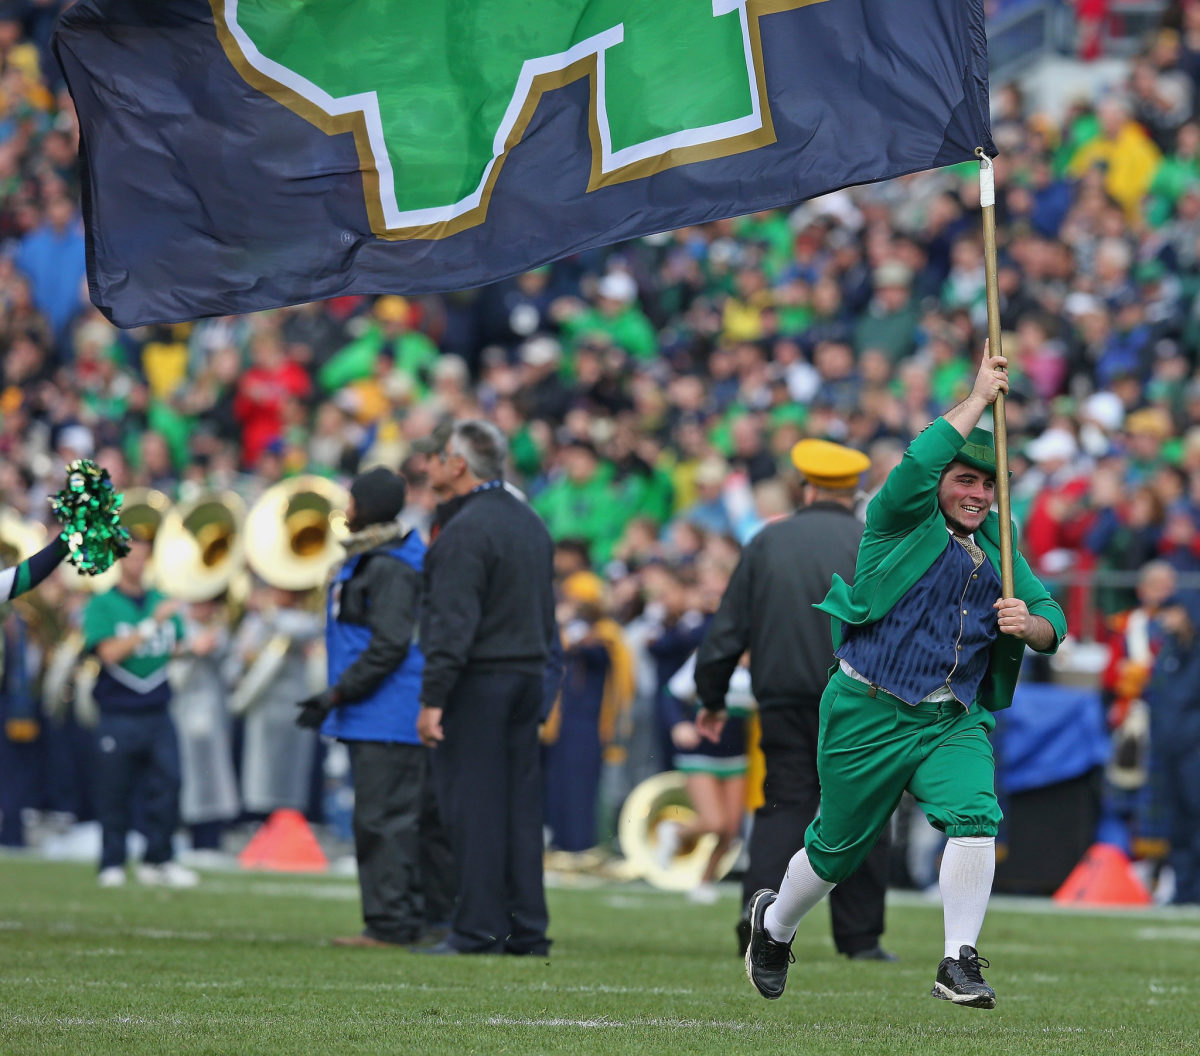 Notre Dame's mascot running onto the field.